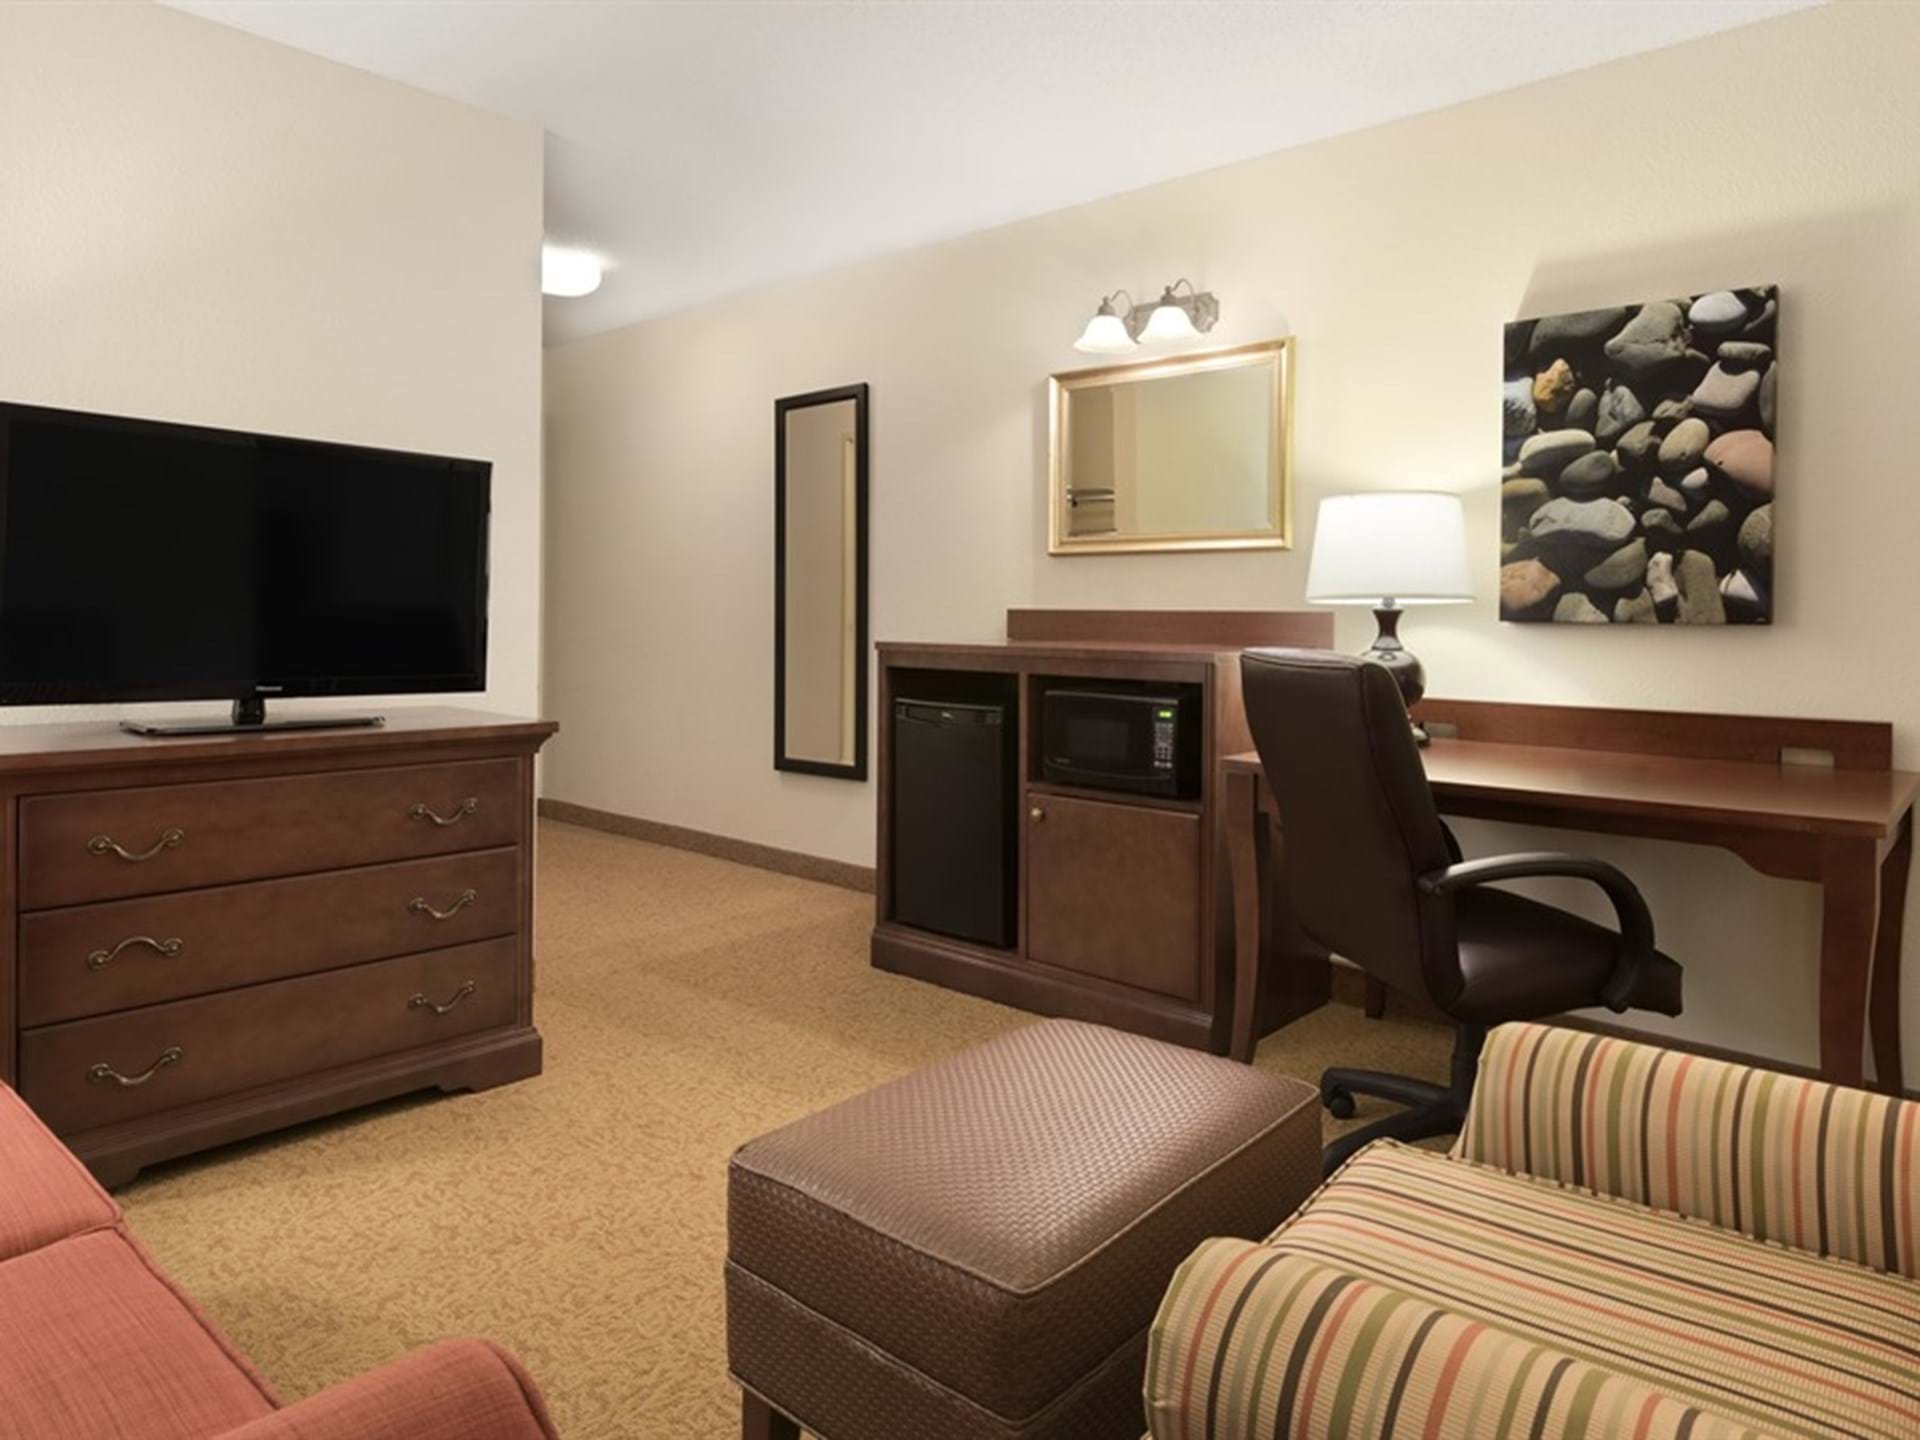 3. Spacious guest rooms with free wi-fi